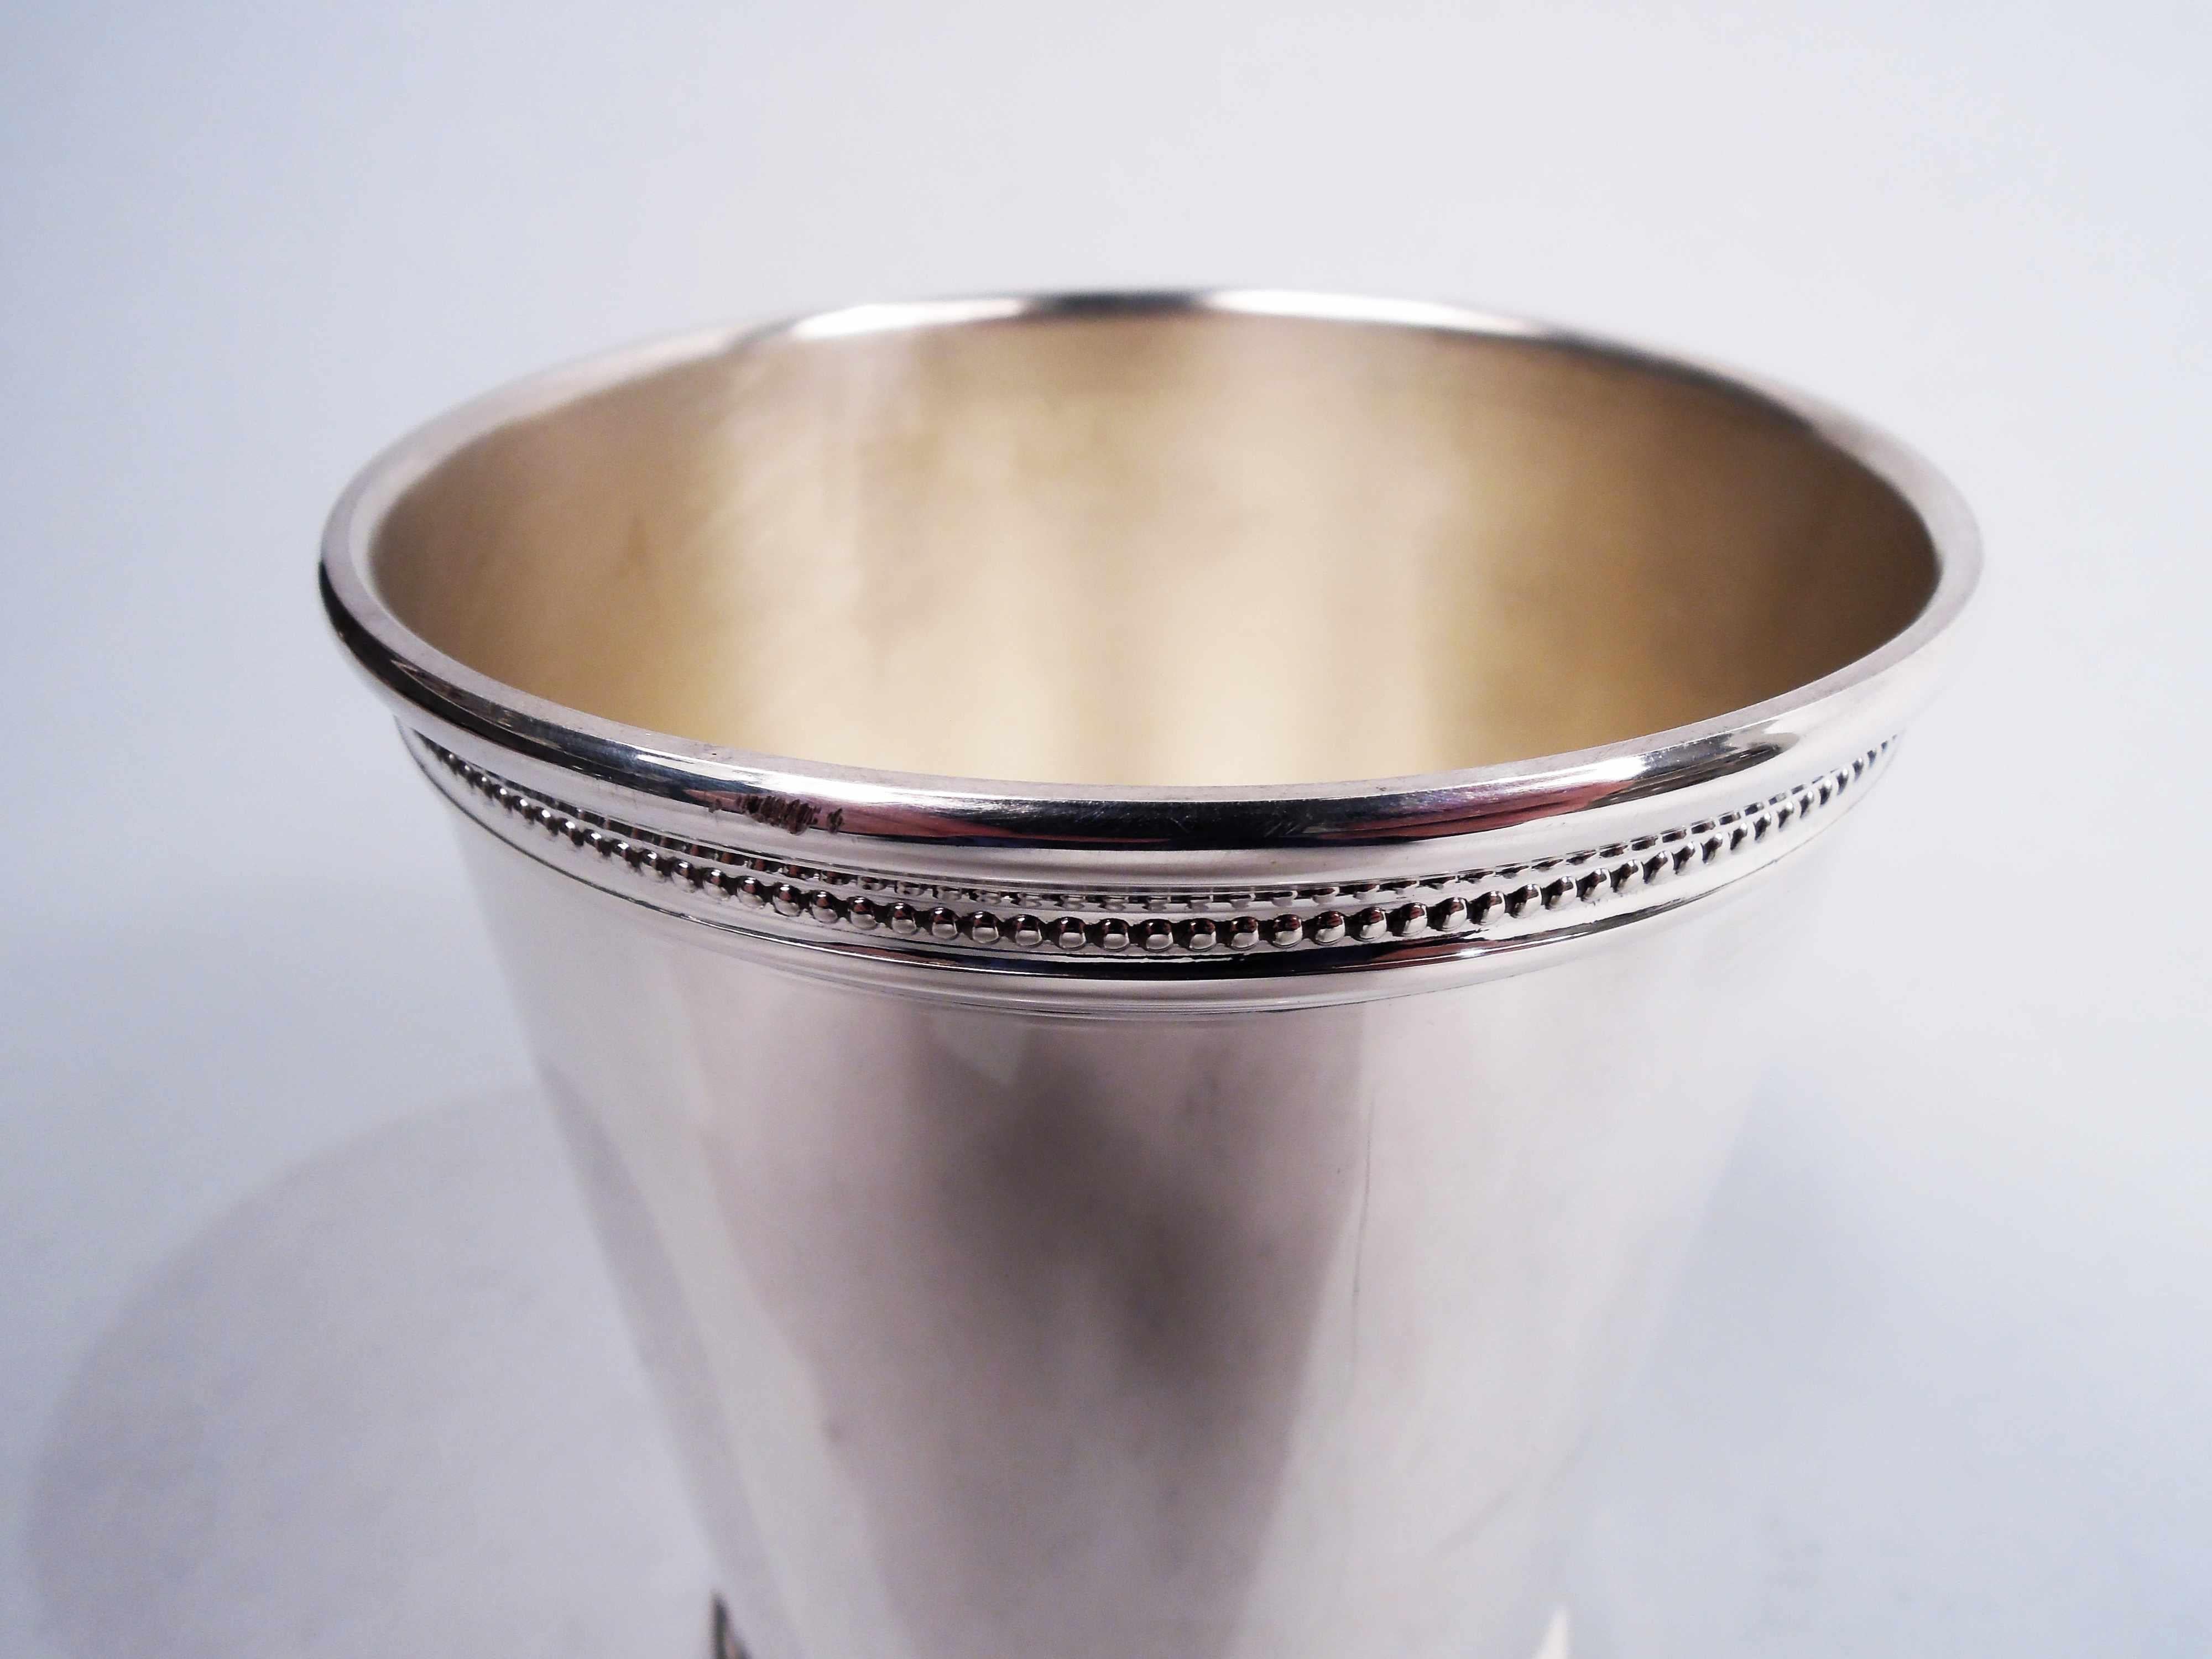 Dubya-era sterling silver mint julep. Made by Scearce in Shelbyville, Kentucky. Straight and tapering sides, and beaded and molded rim and foot. A great barware cup from the surprisingly long ago aughts. Marks include maker's stamp and presidential